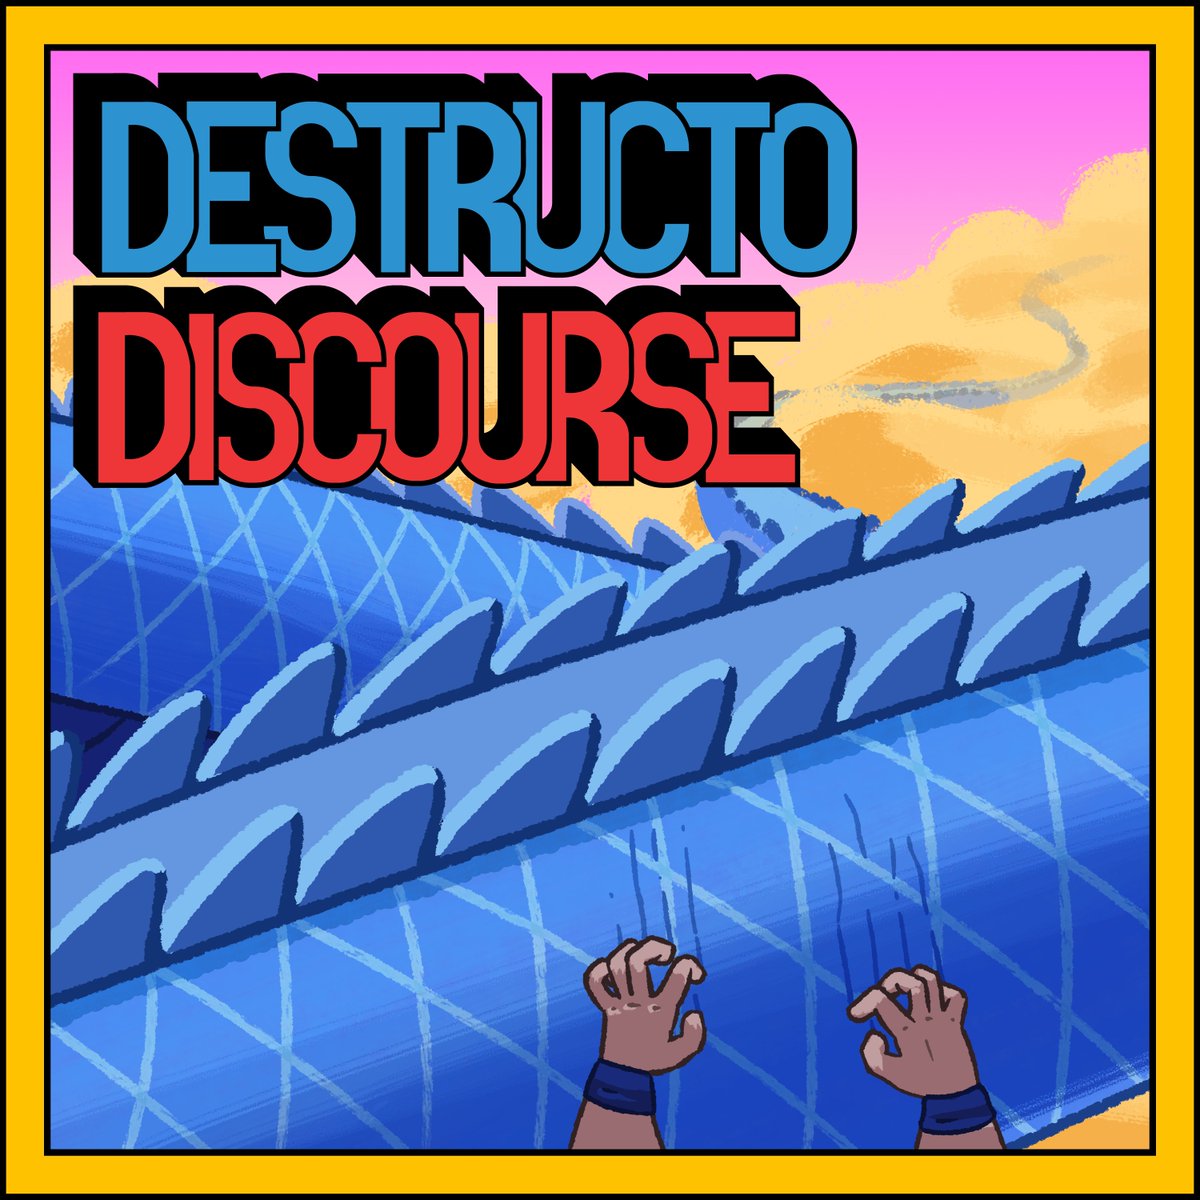 The covers i've illustrated going over the sagas for  @Destructo_Disc - a thread